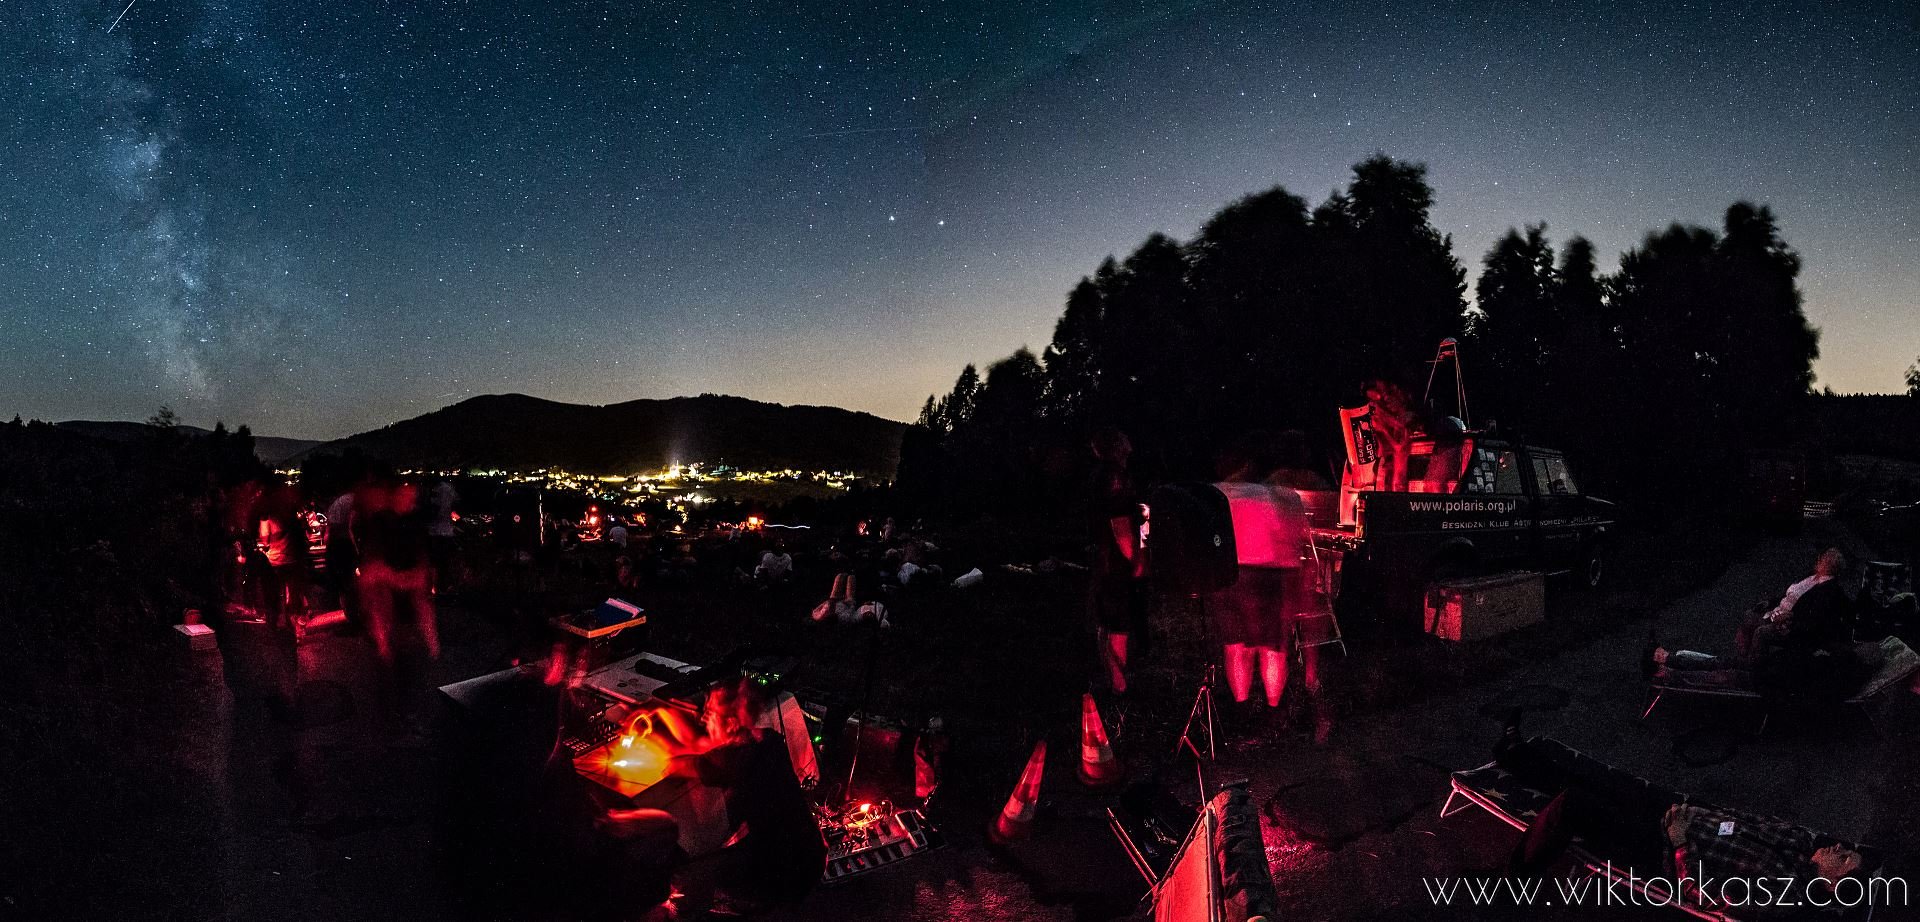 People gather for an event to view the stars.